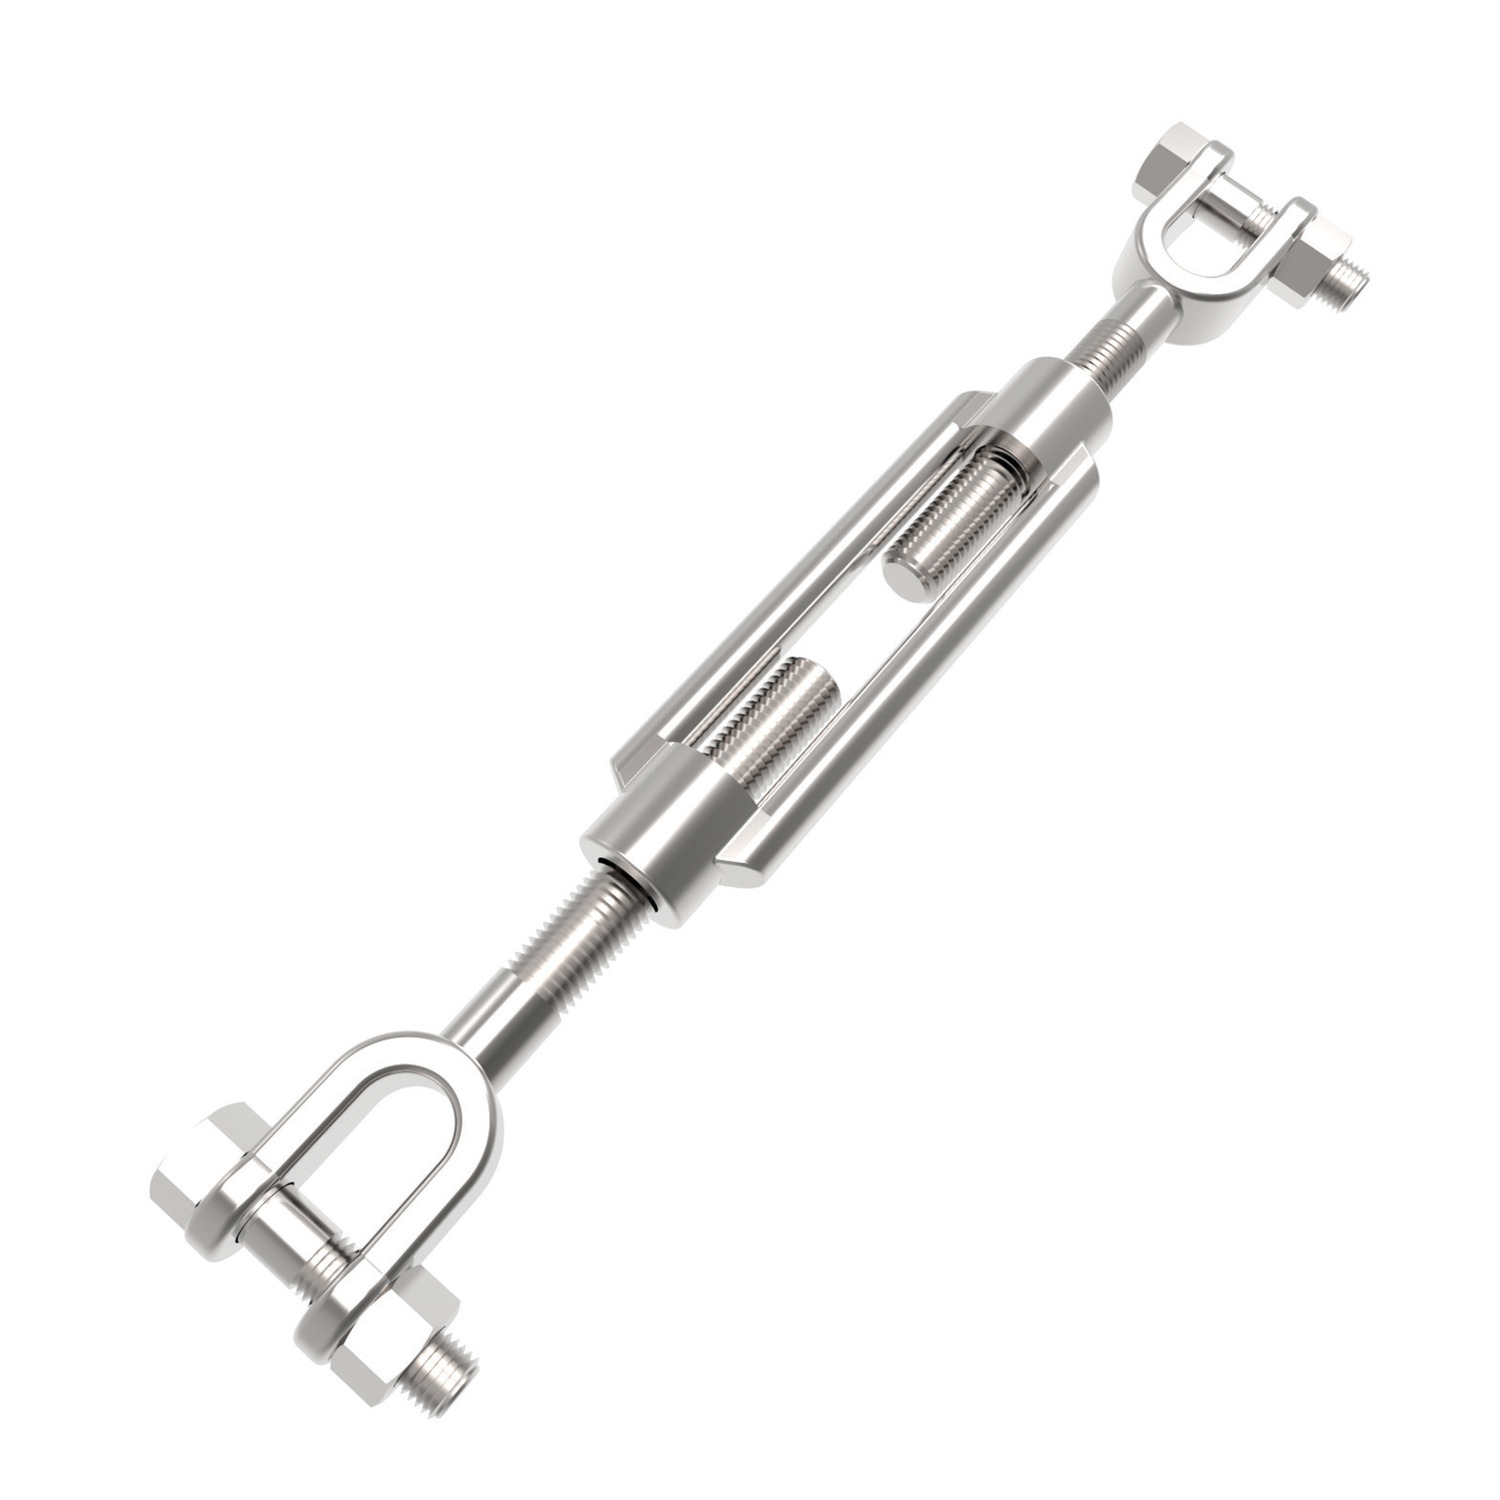 Jaw End Turnbuckle Steel turnbuckles manufactured to DIN 1480 jaw to jaw. Sizes ranging from M8 to M30. Lengths from 110mm to 255mm.